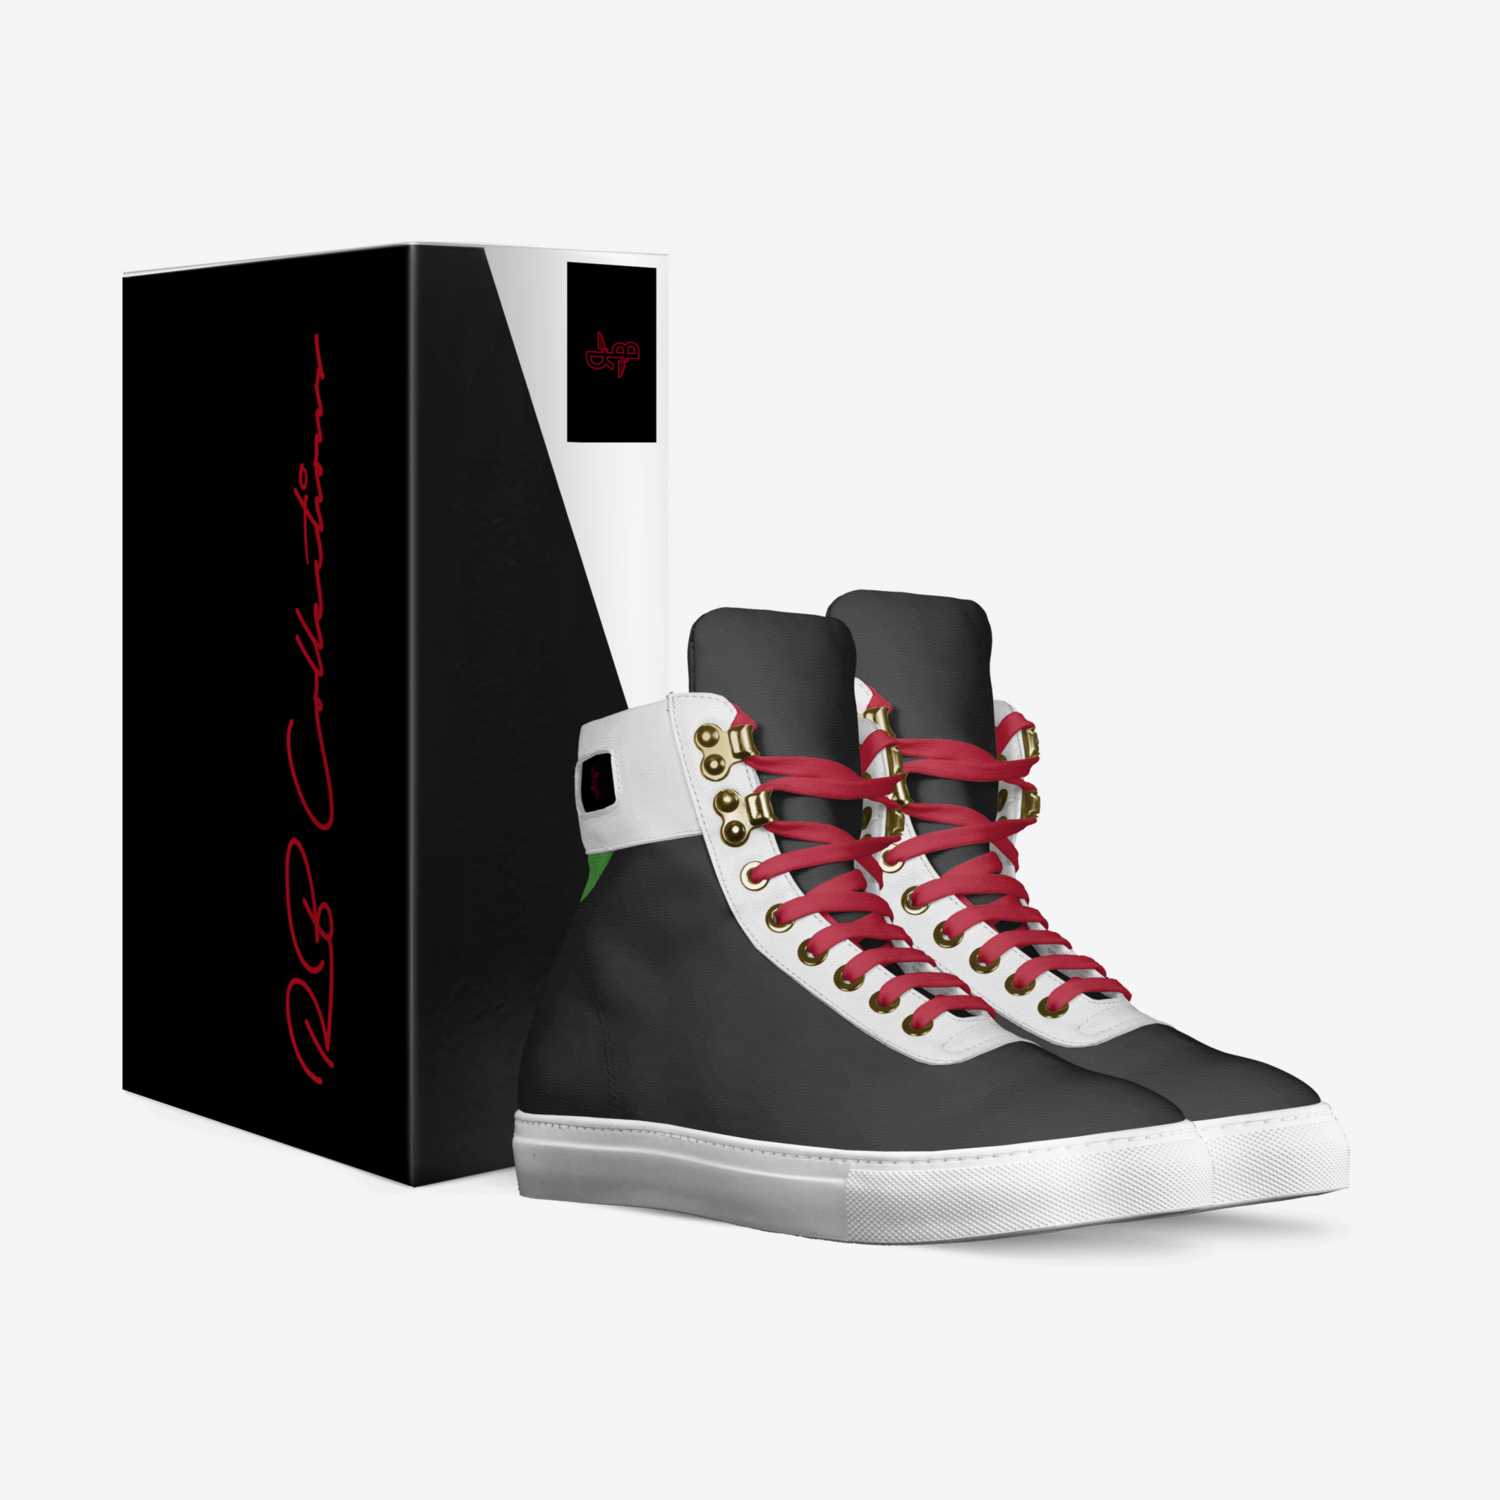 RB LUXURY SNEAKER custom made in Italy shoes by Jae Bellamy | Box view